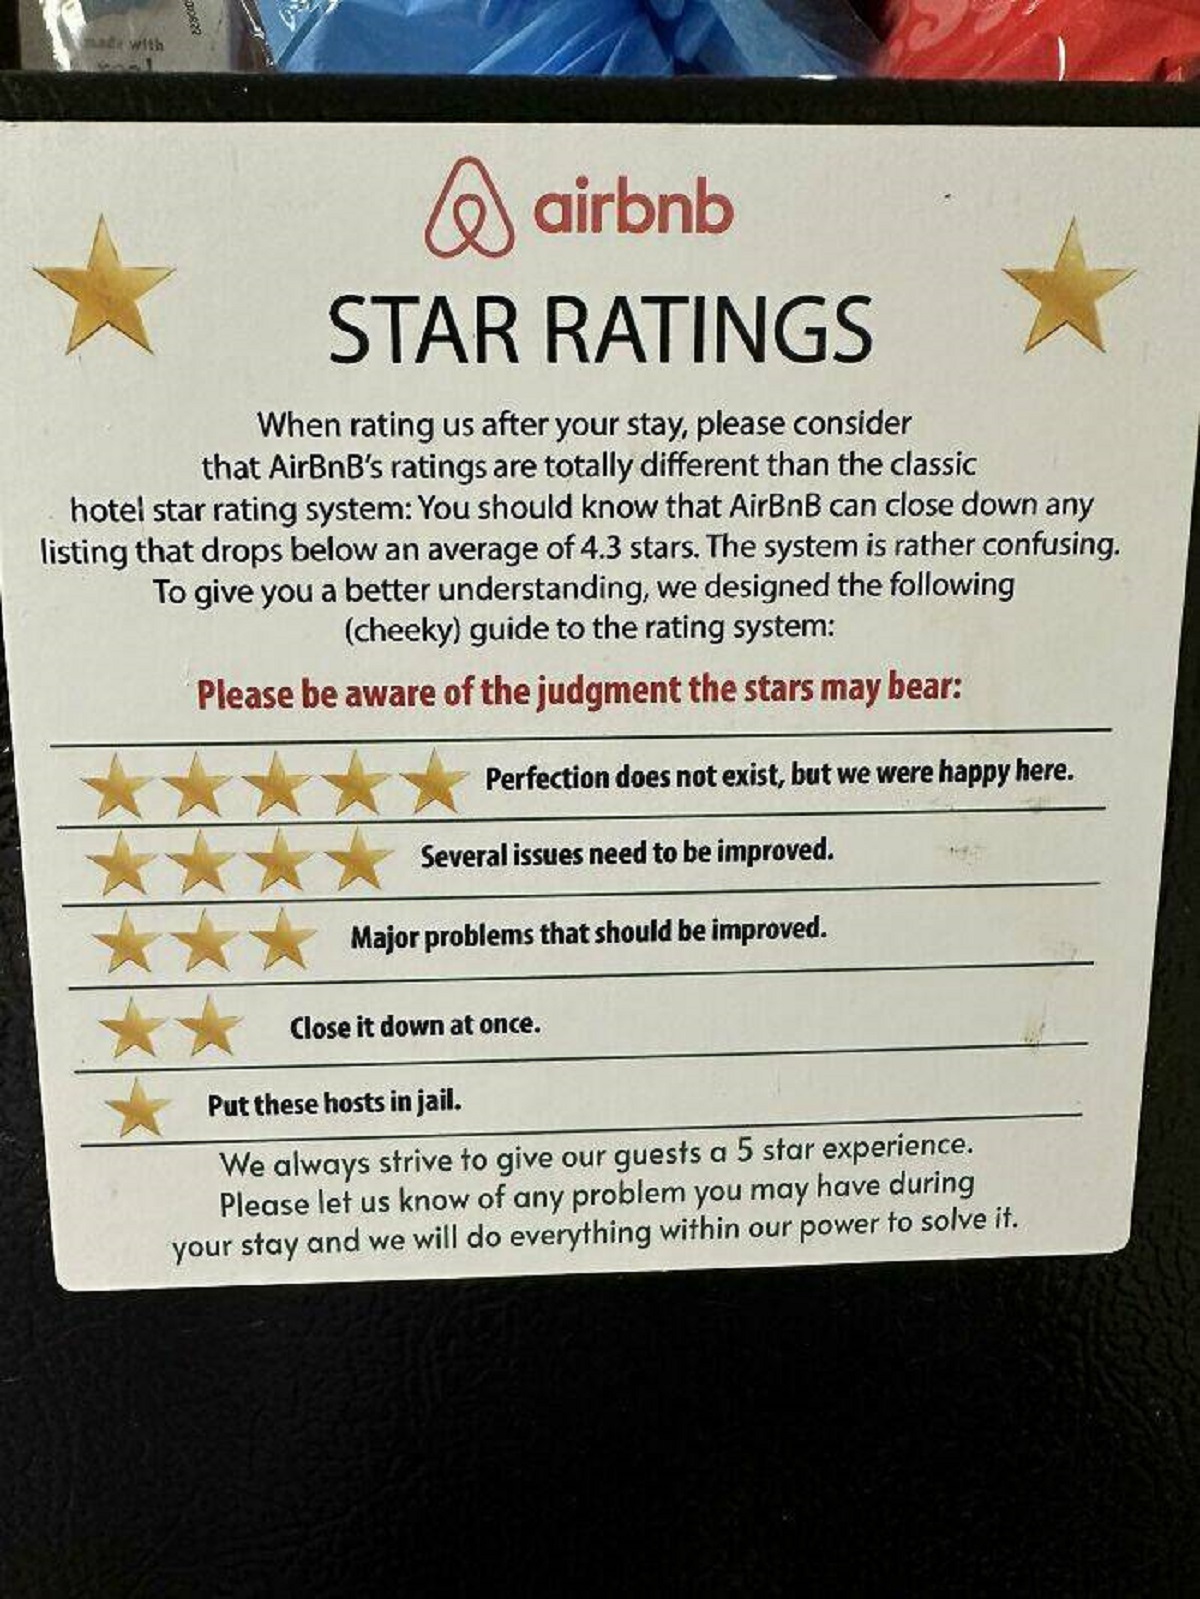 fascinating photos - airbnb Star Ratings When rating us after your stay, please consider that AirBnB's ratings are totally different than the classic hotel star rating system You should know that AirBnB can close down any listing that drops below an avera